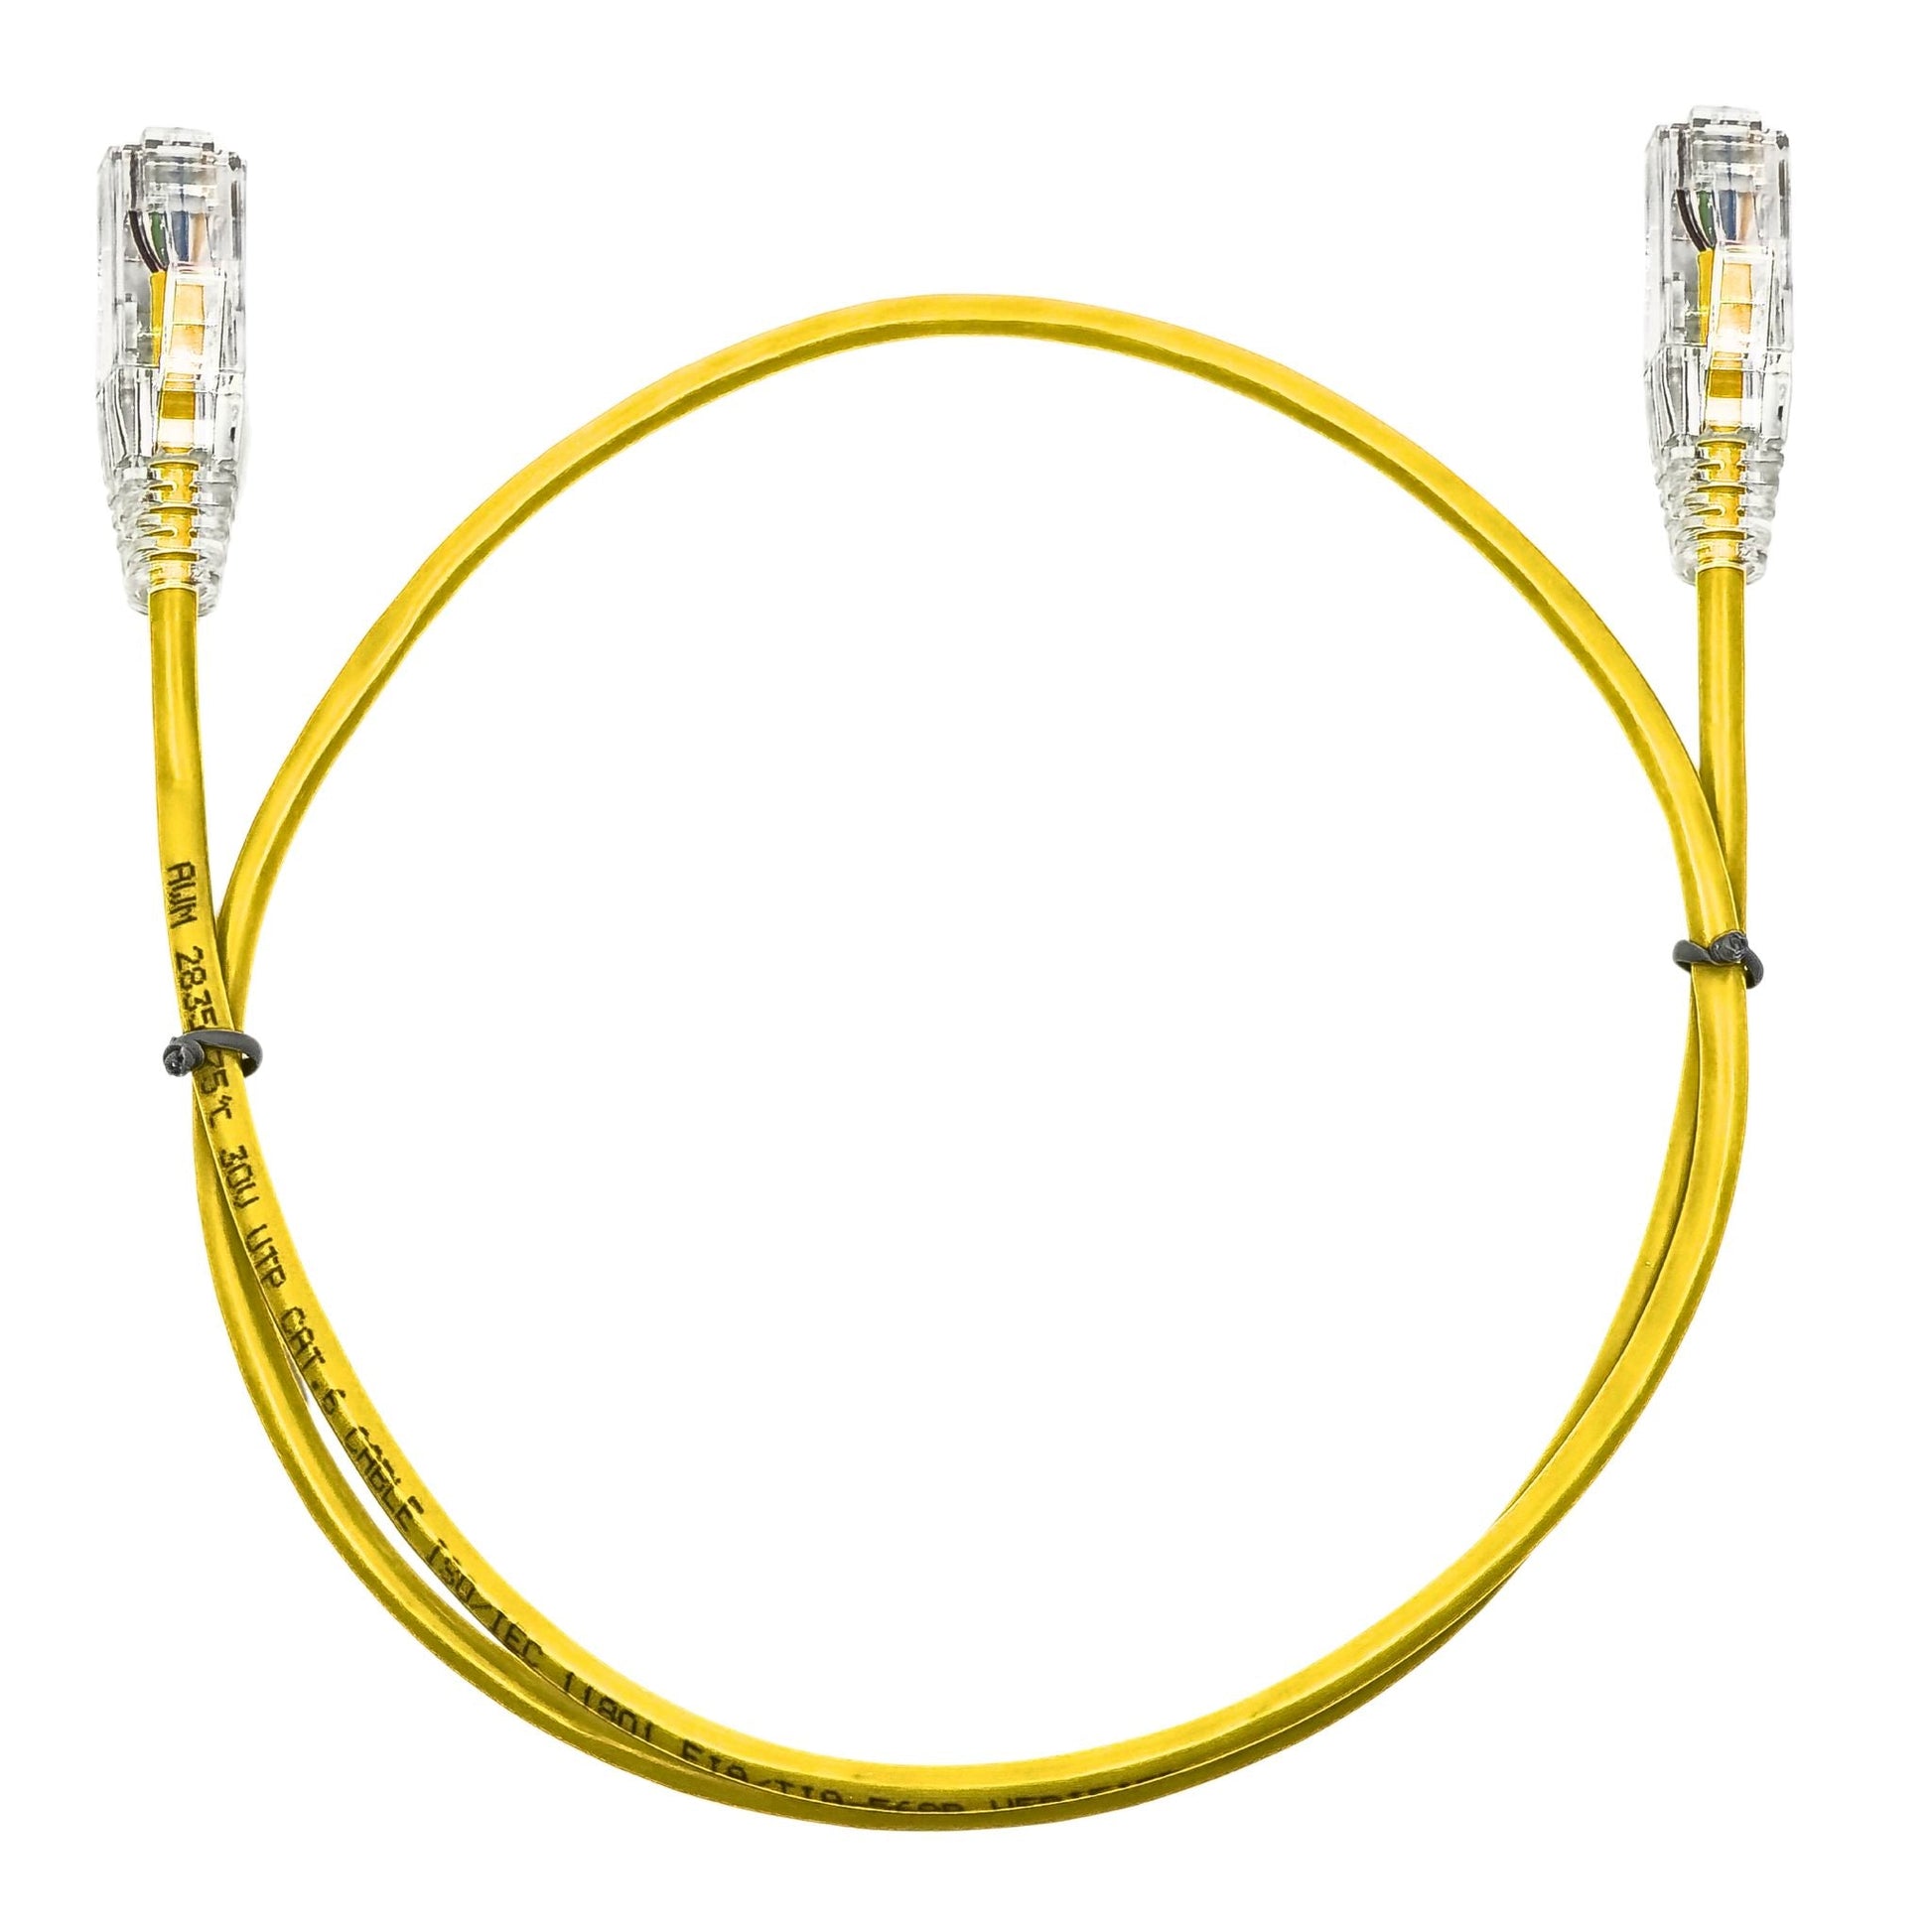 0.25M CAT6 Slim Network Cable - Yellow